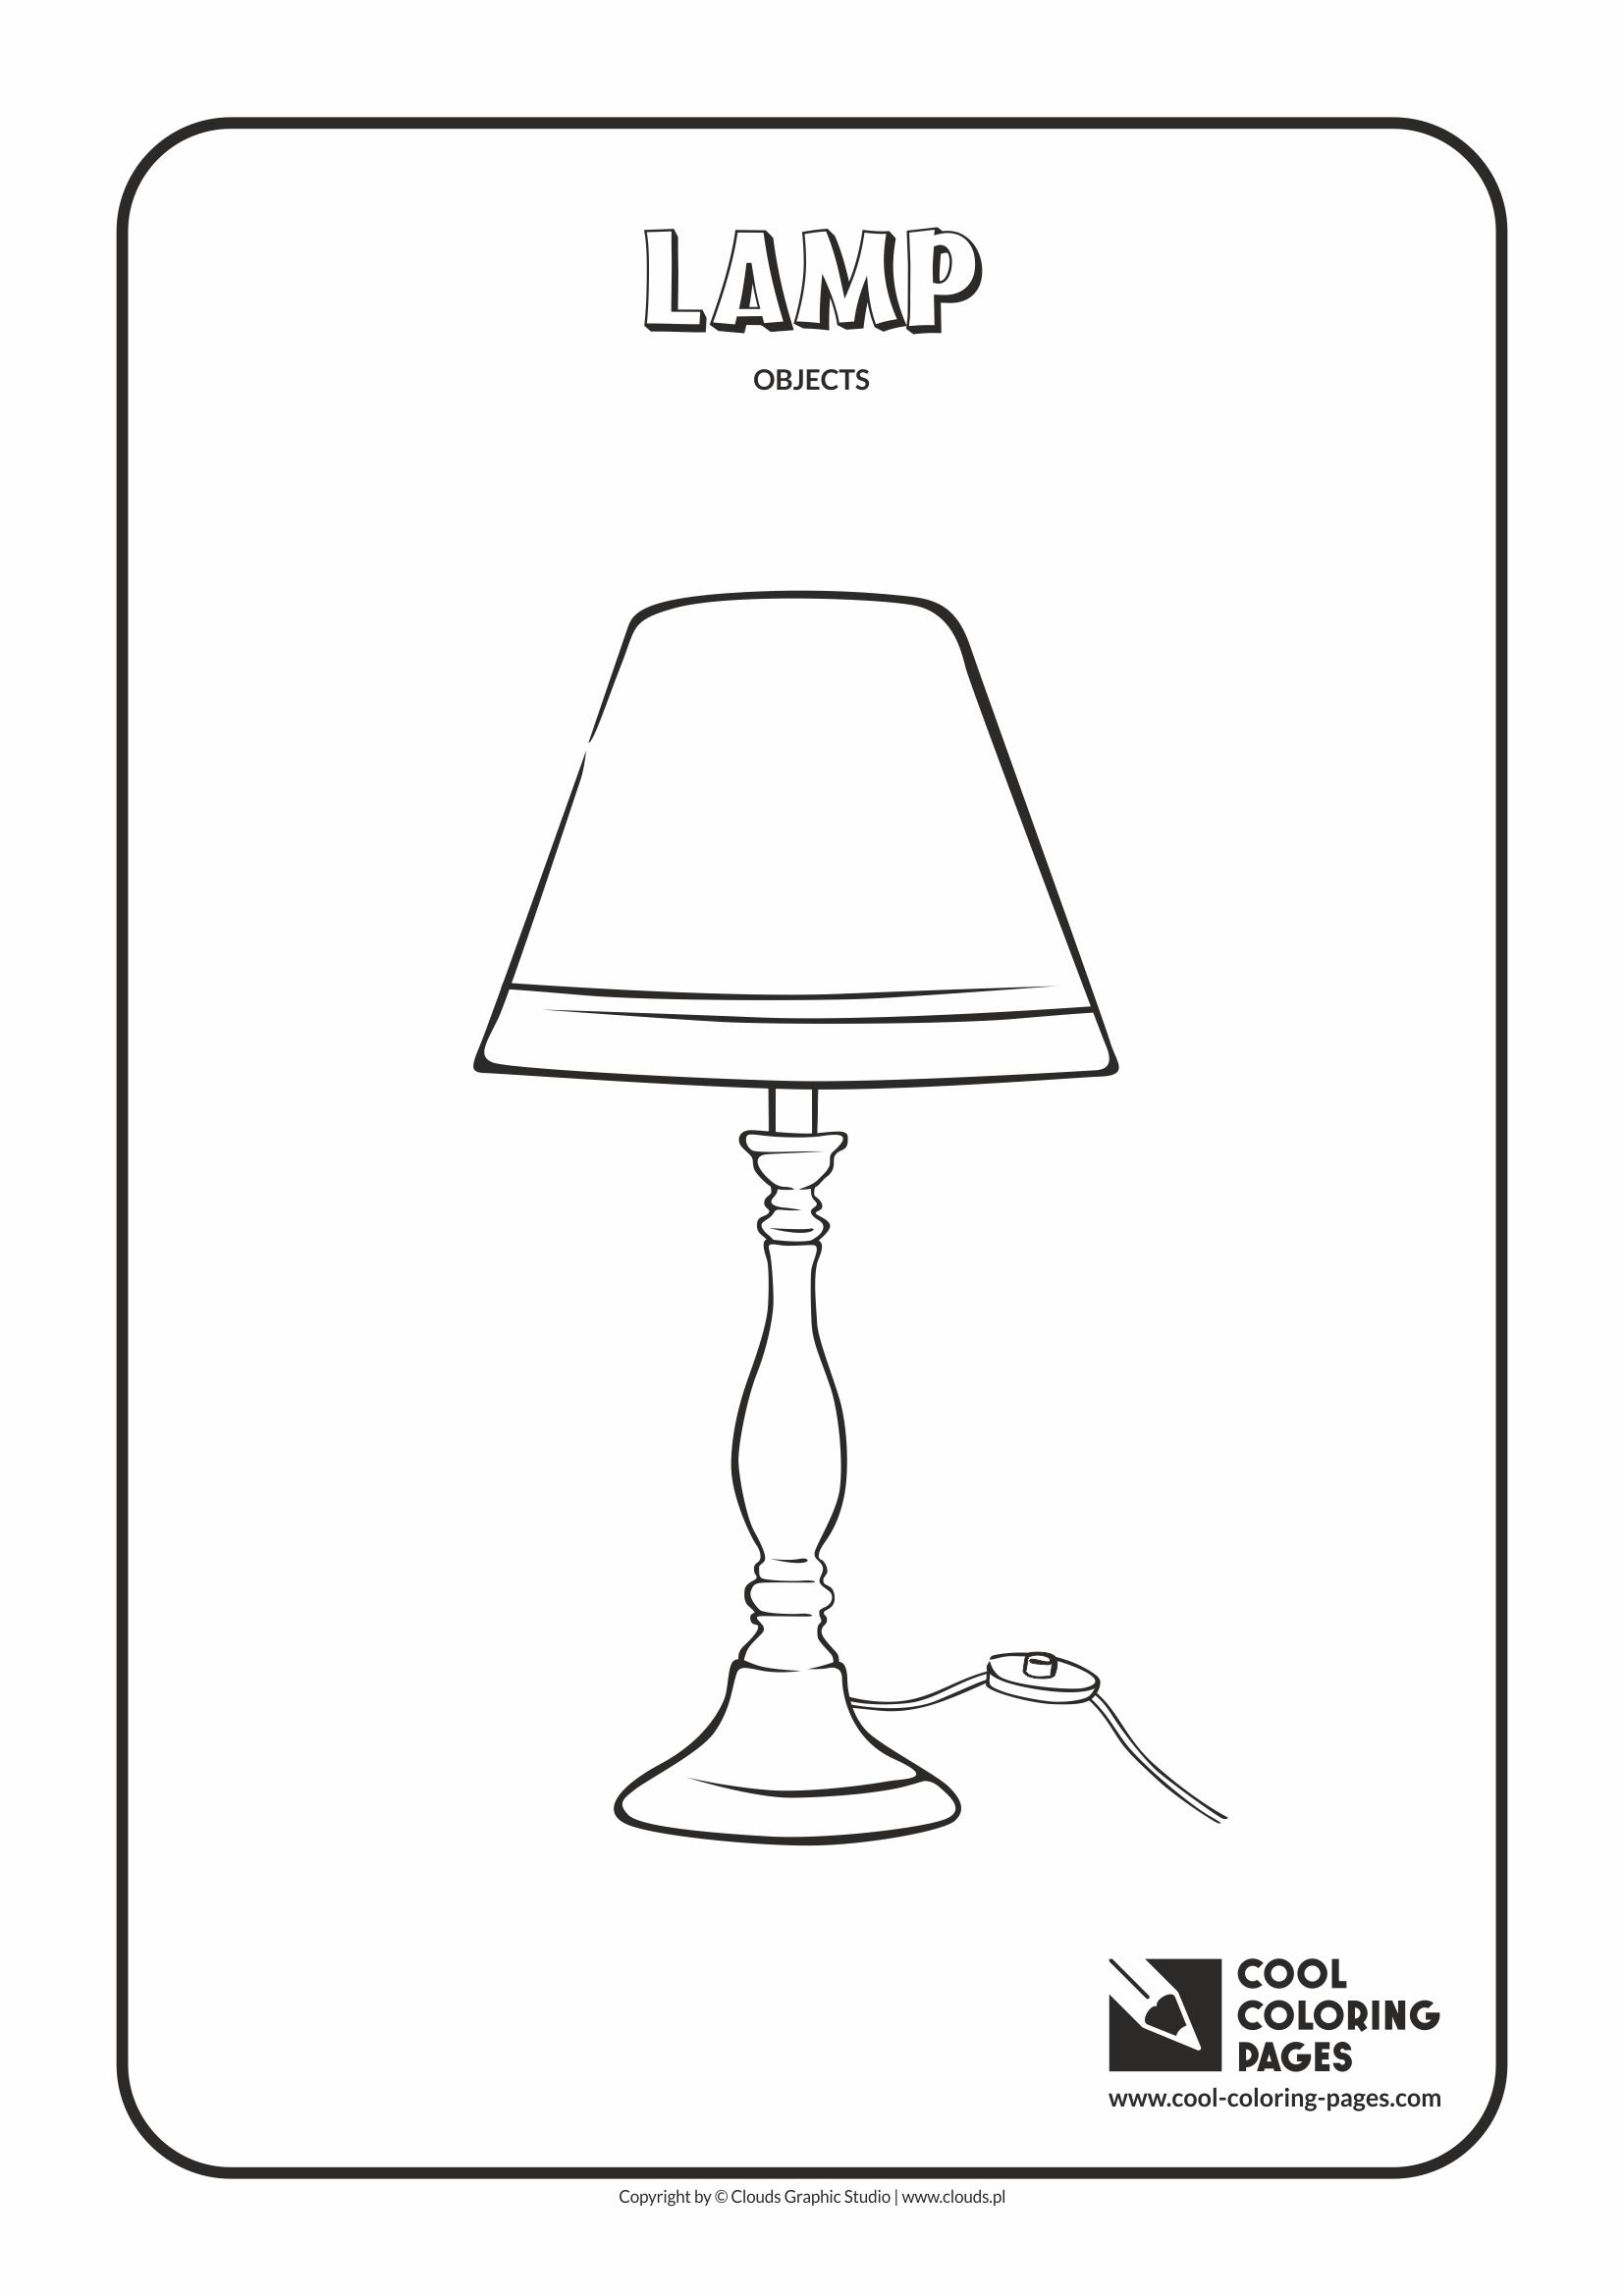 Cool Coloring Pages Coloring Objects - Cool Coloring Pages | Free educational coloring ...